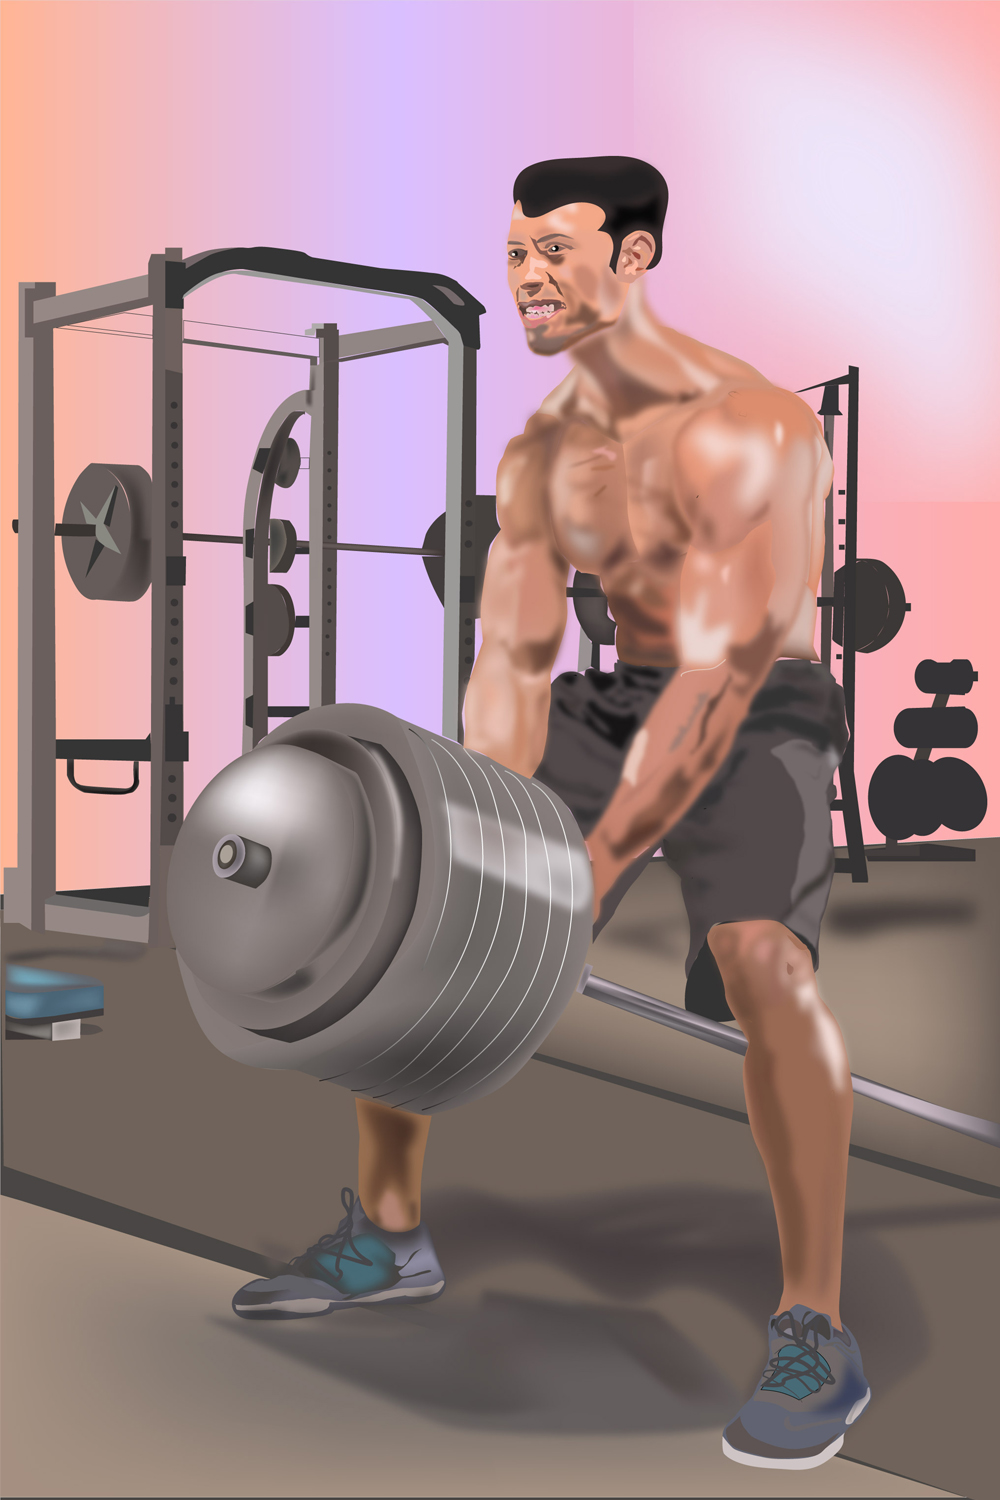 Body Builder Lifting Weight in the Gym Illustration - pinterest image preview.